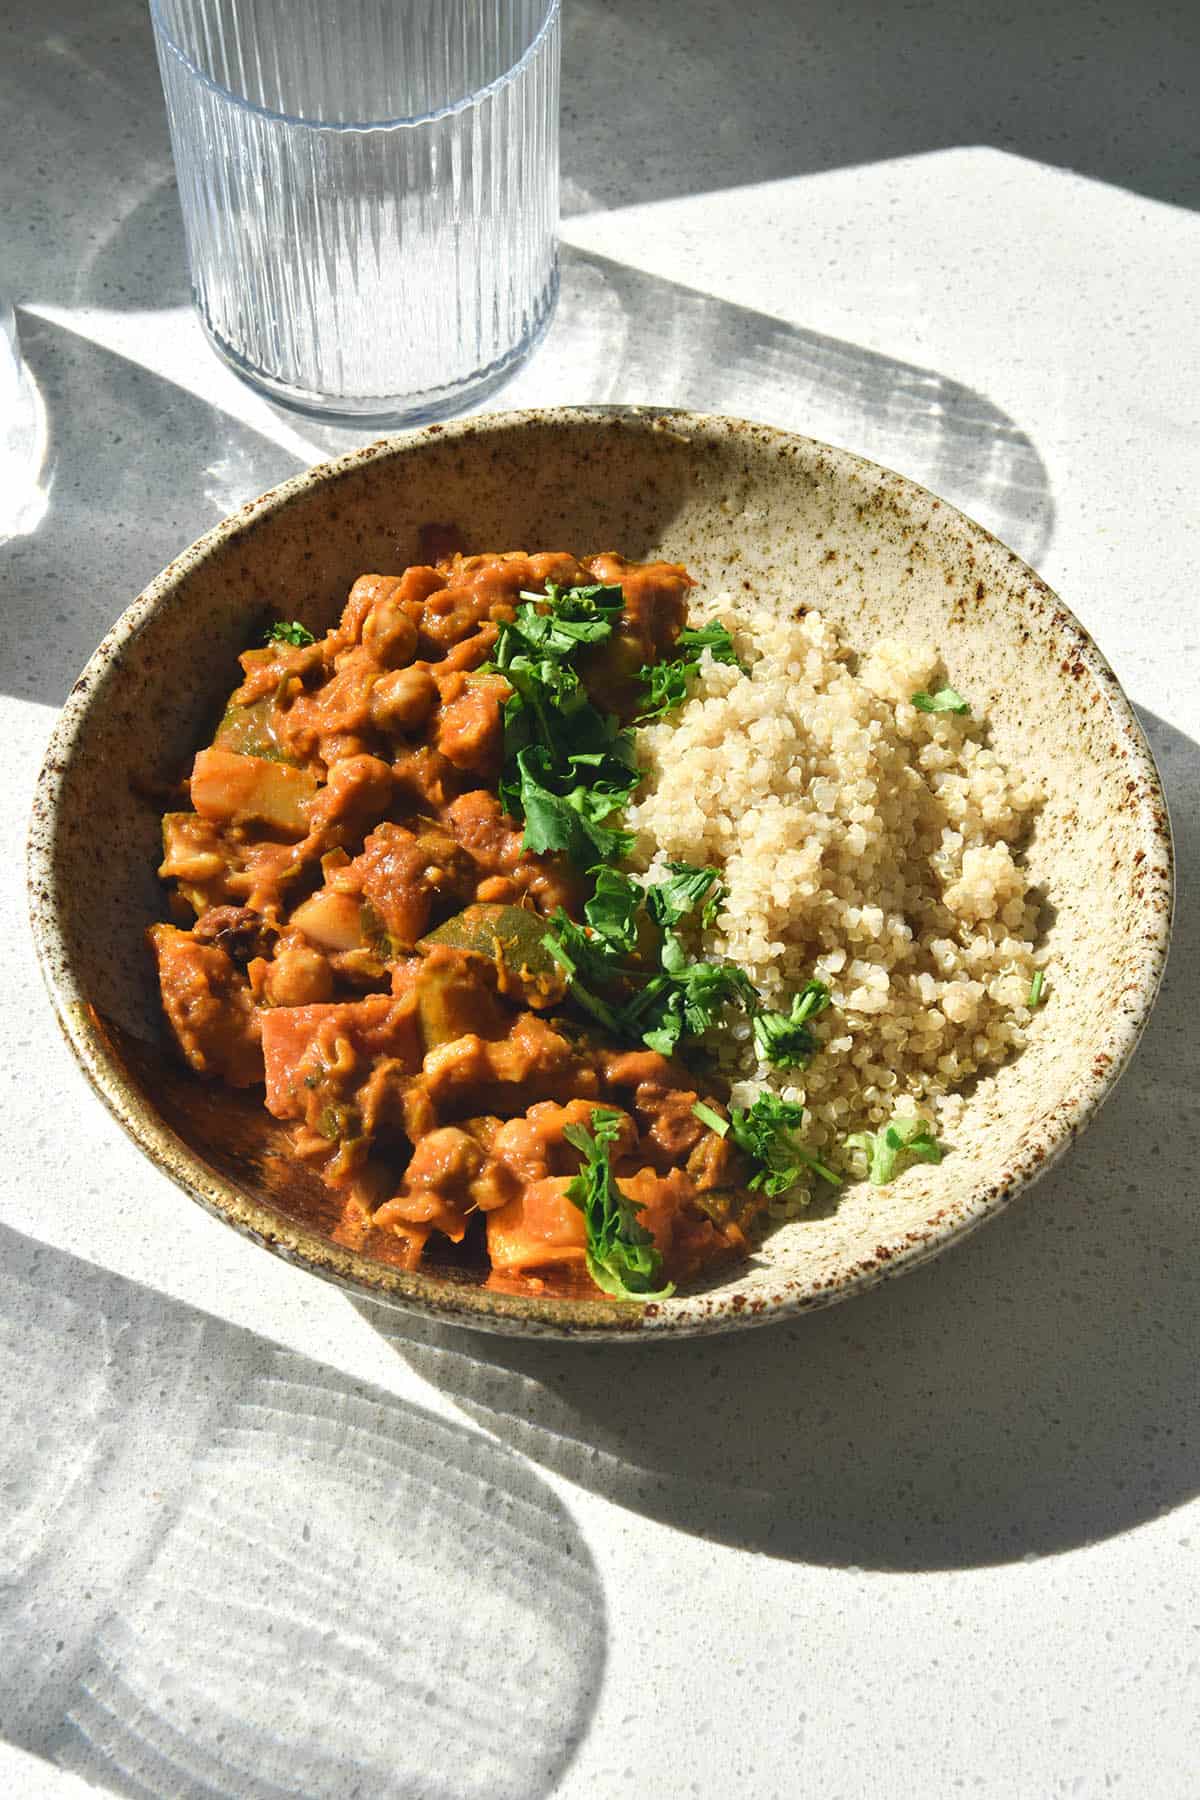 A brightly sunlit view of a speckled ceramic bowl of FODMAP friendly vegetable tagine served with quinoa and topped with coriander. The bowl sits on a white stone benchtop and is surrounded by glasses of water that create a shadow over the image